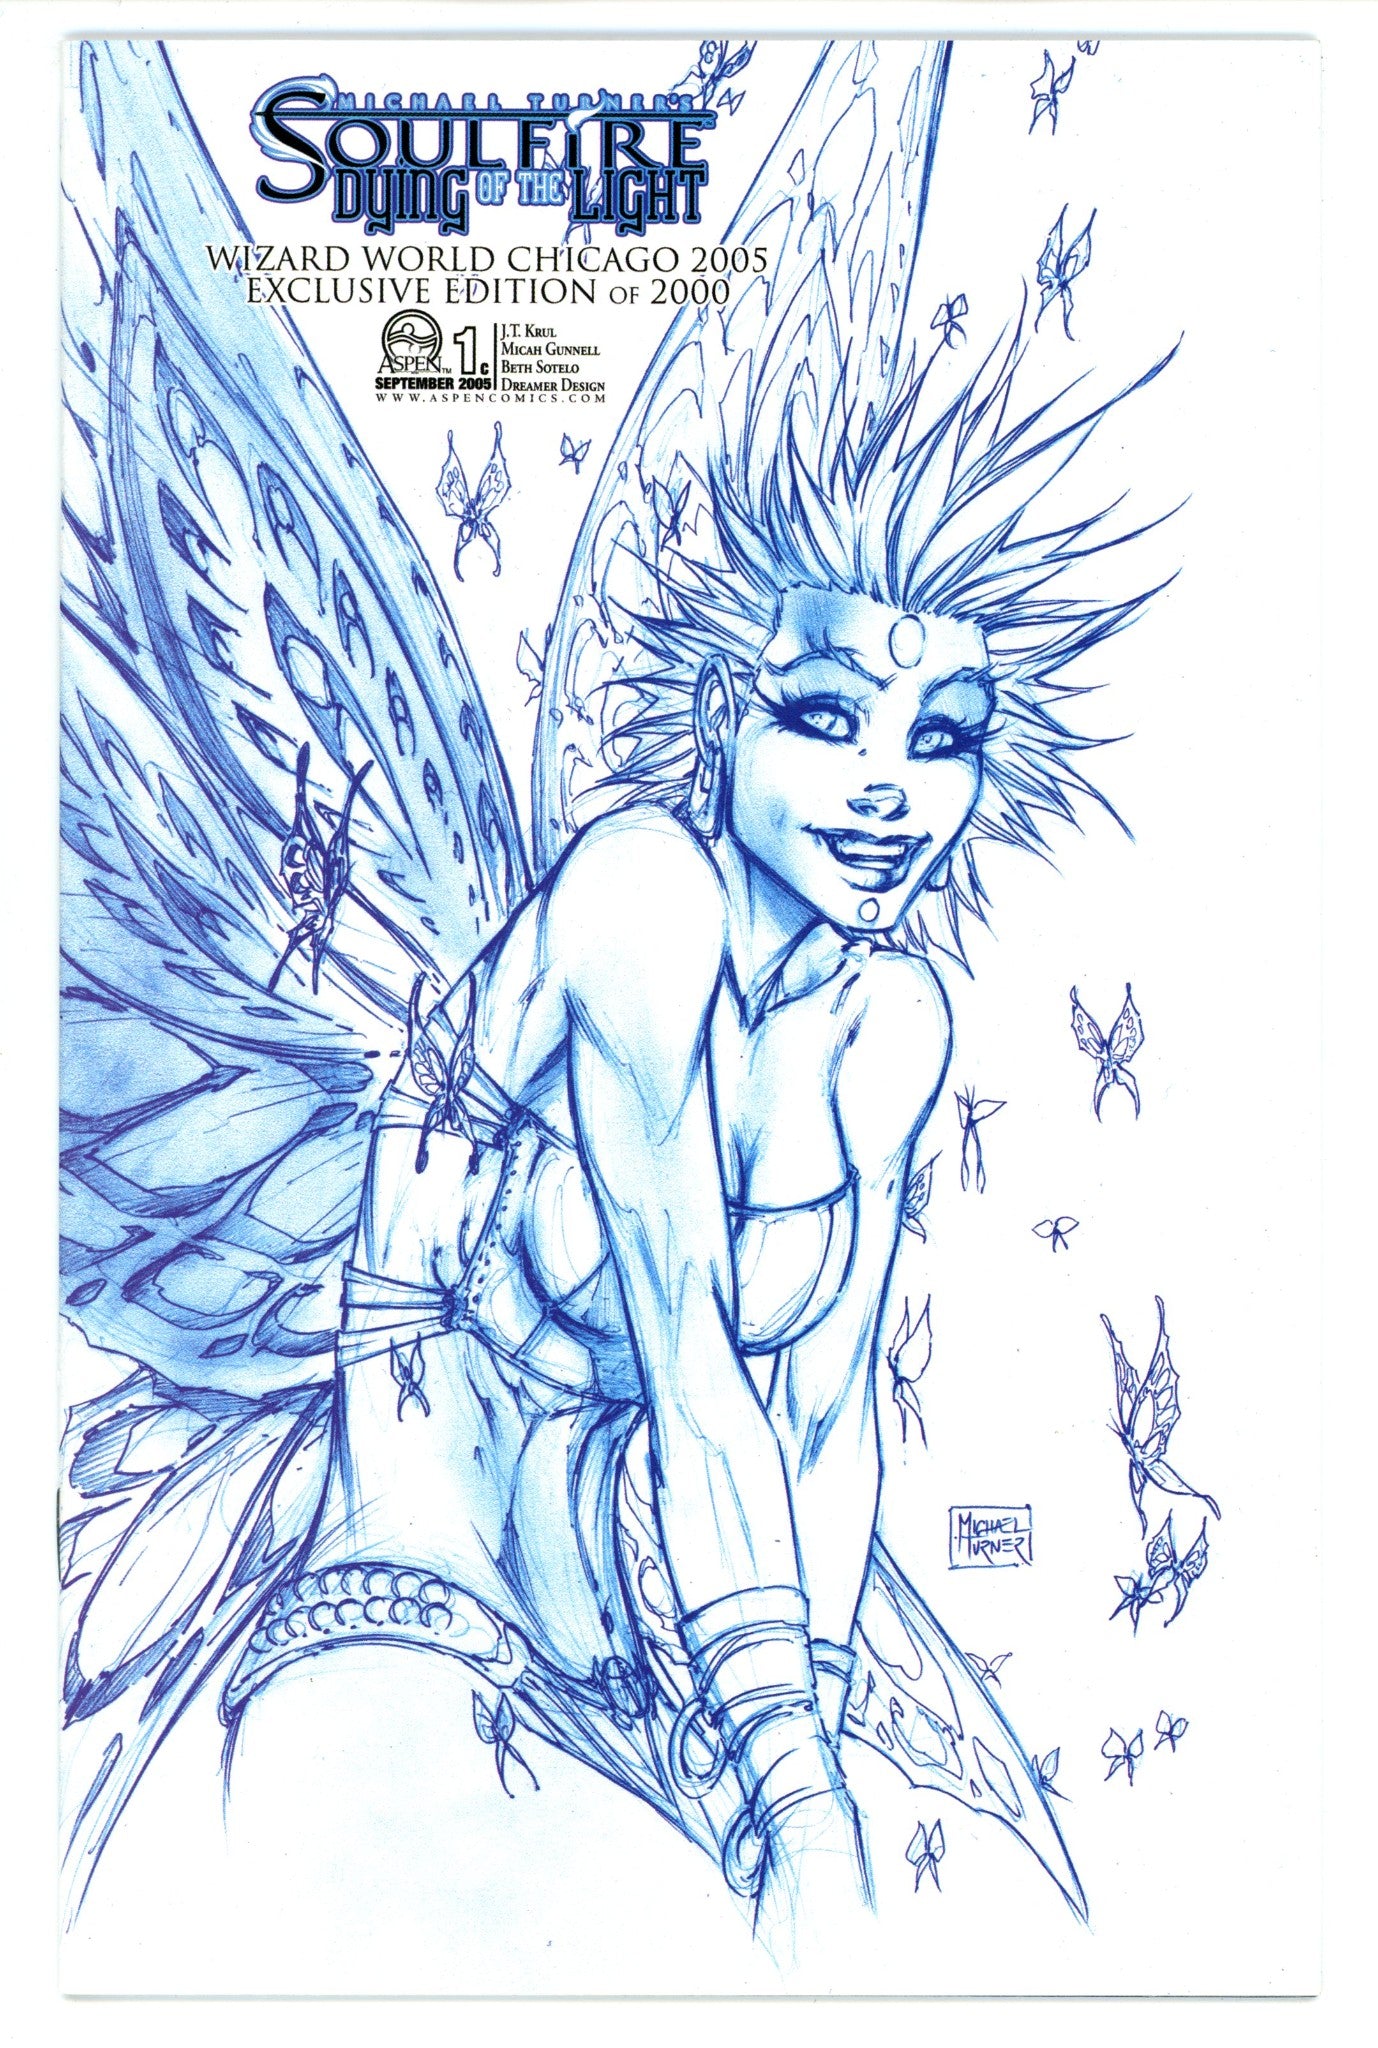 Michael Turner's Soulfire: Dying of the Light 1 NM- (9.2) (2005) Turner Sketch Exclusive Variant 